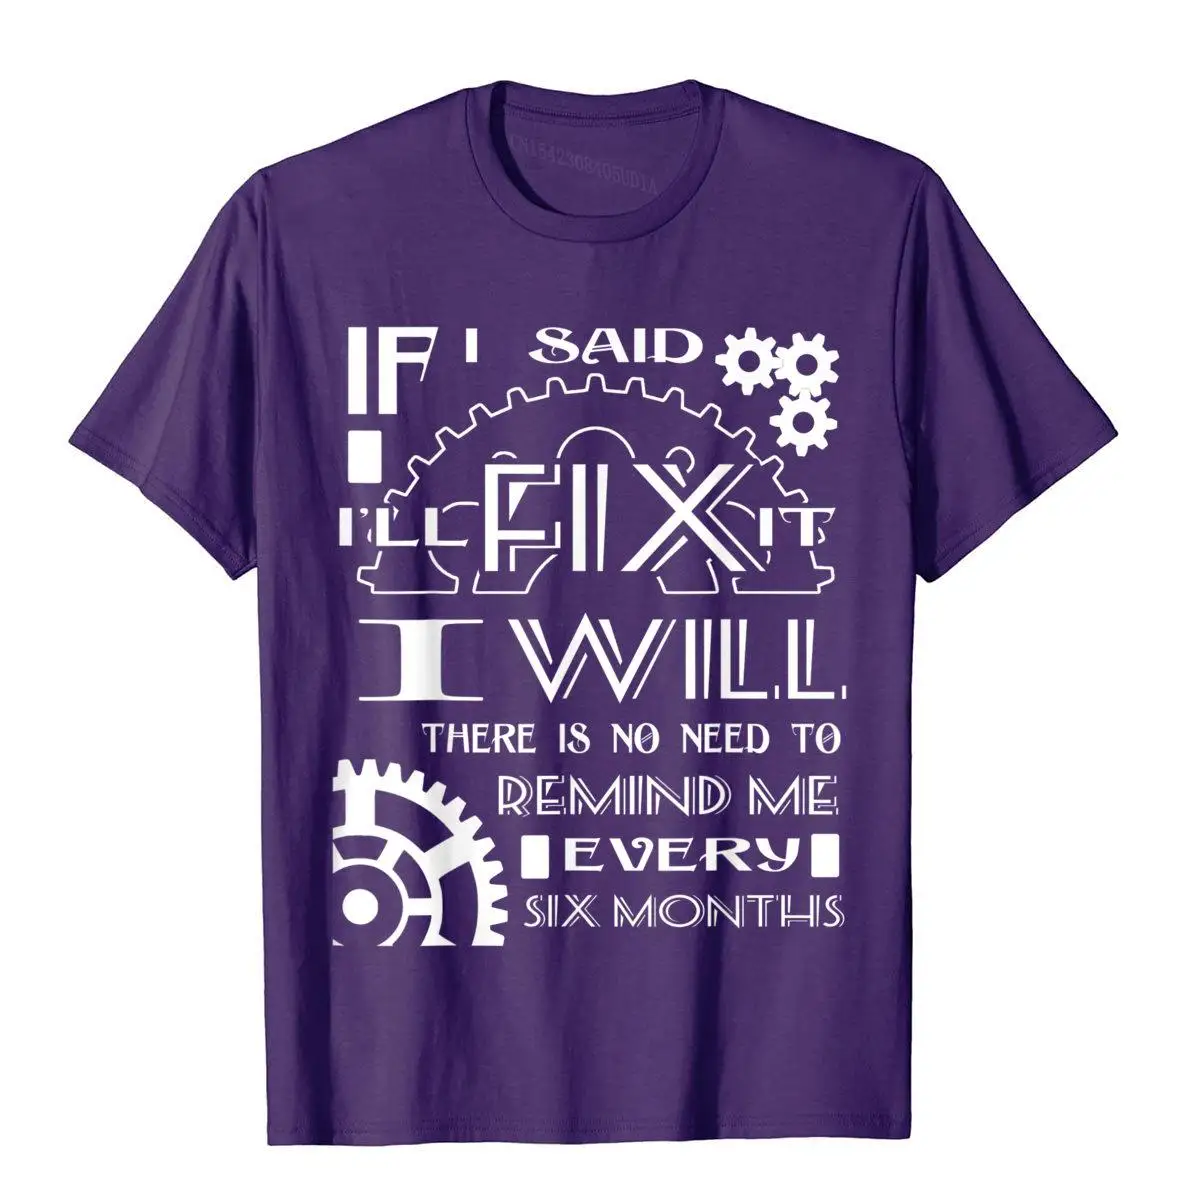 I Will There Is No Need To Remind Me Every Six Months Shirt__A11861purple